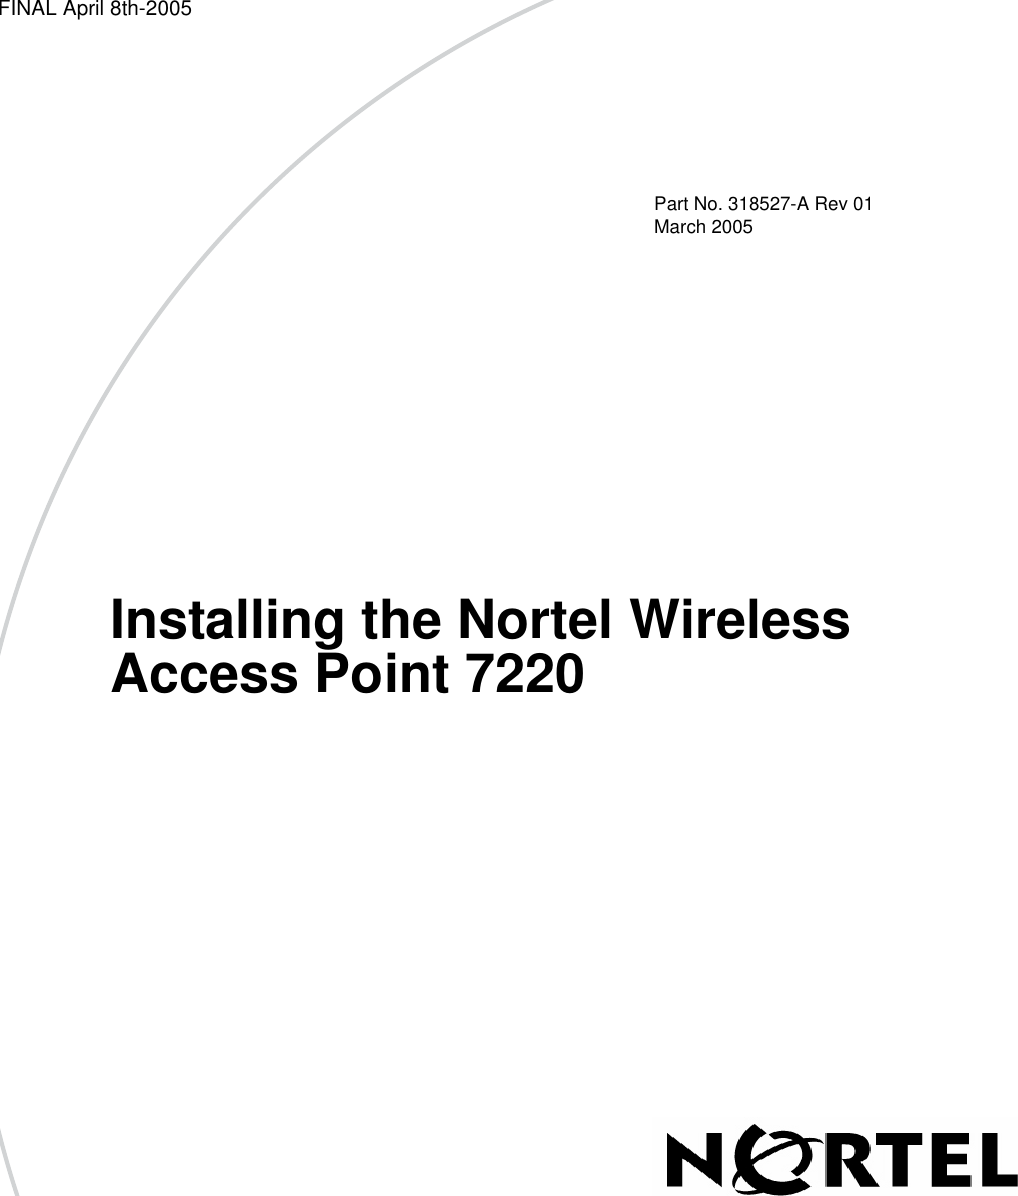 FINAL April 8th-2005Part No. 318527-A Rev 01March 2005Installing the Nortel Wireless Access Point 7220